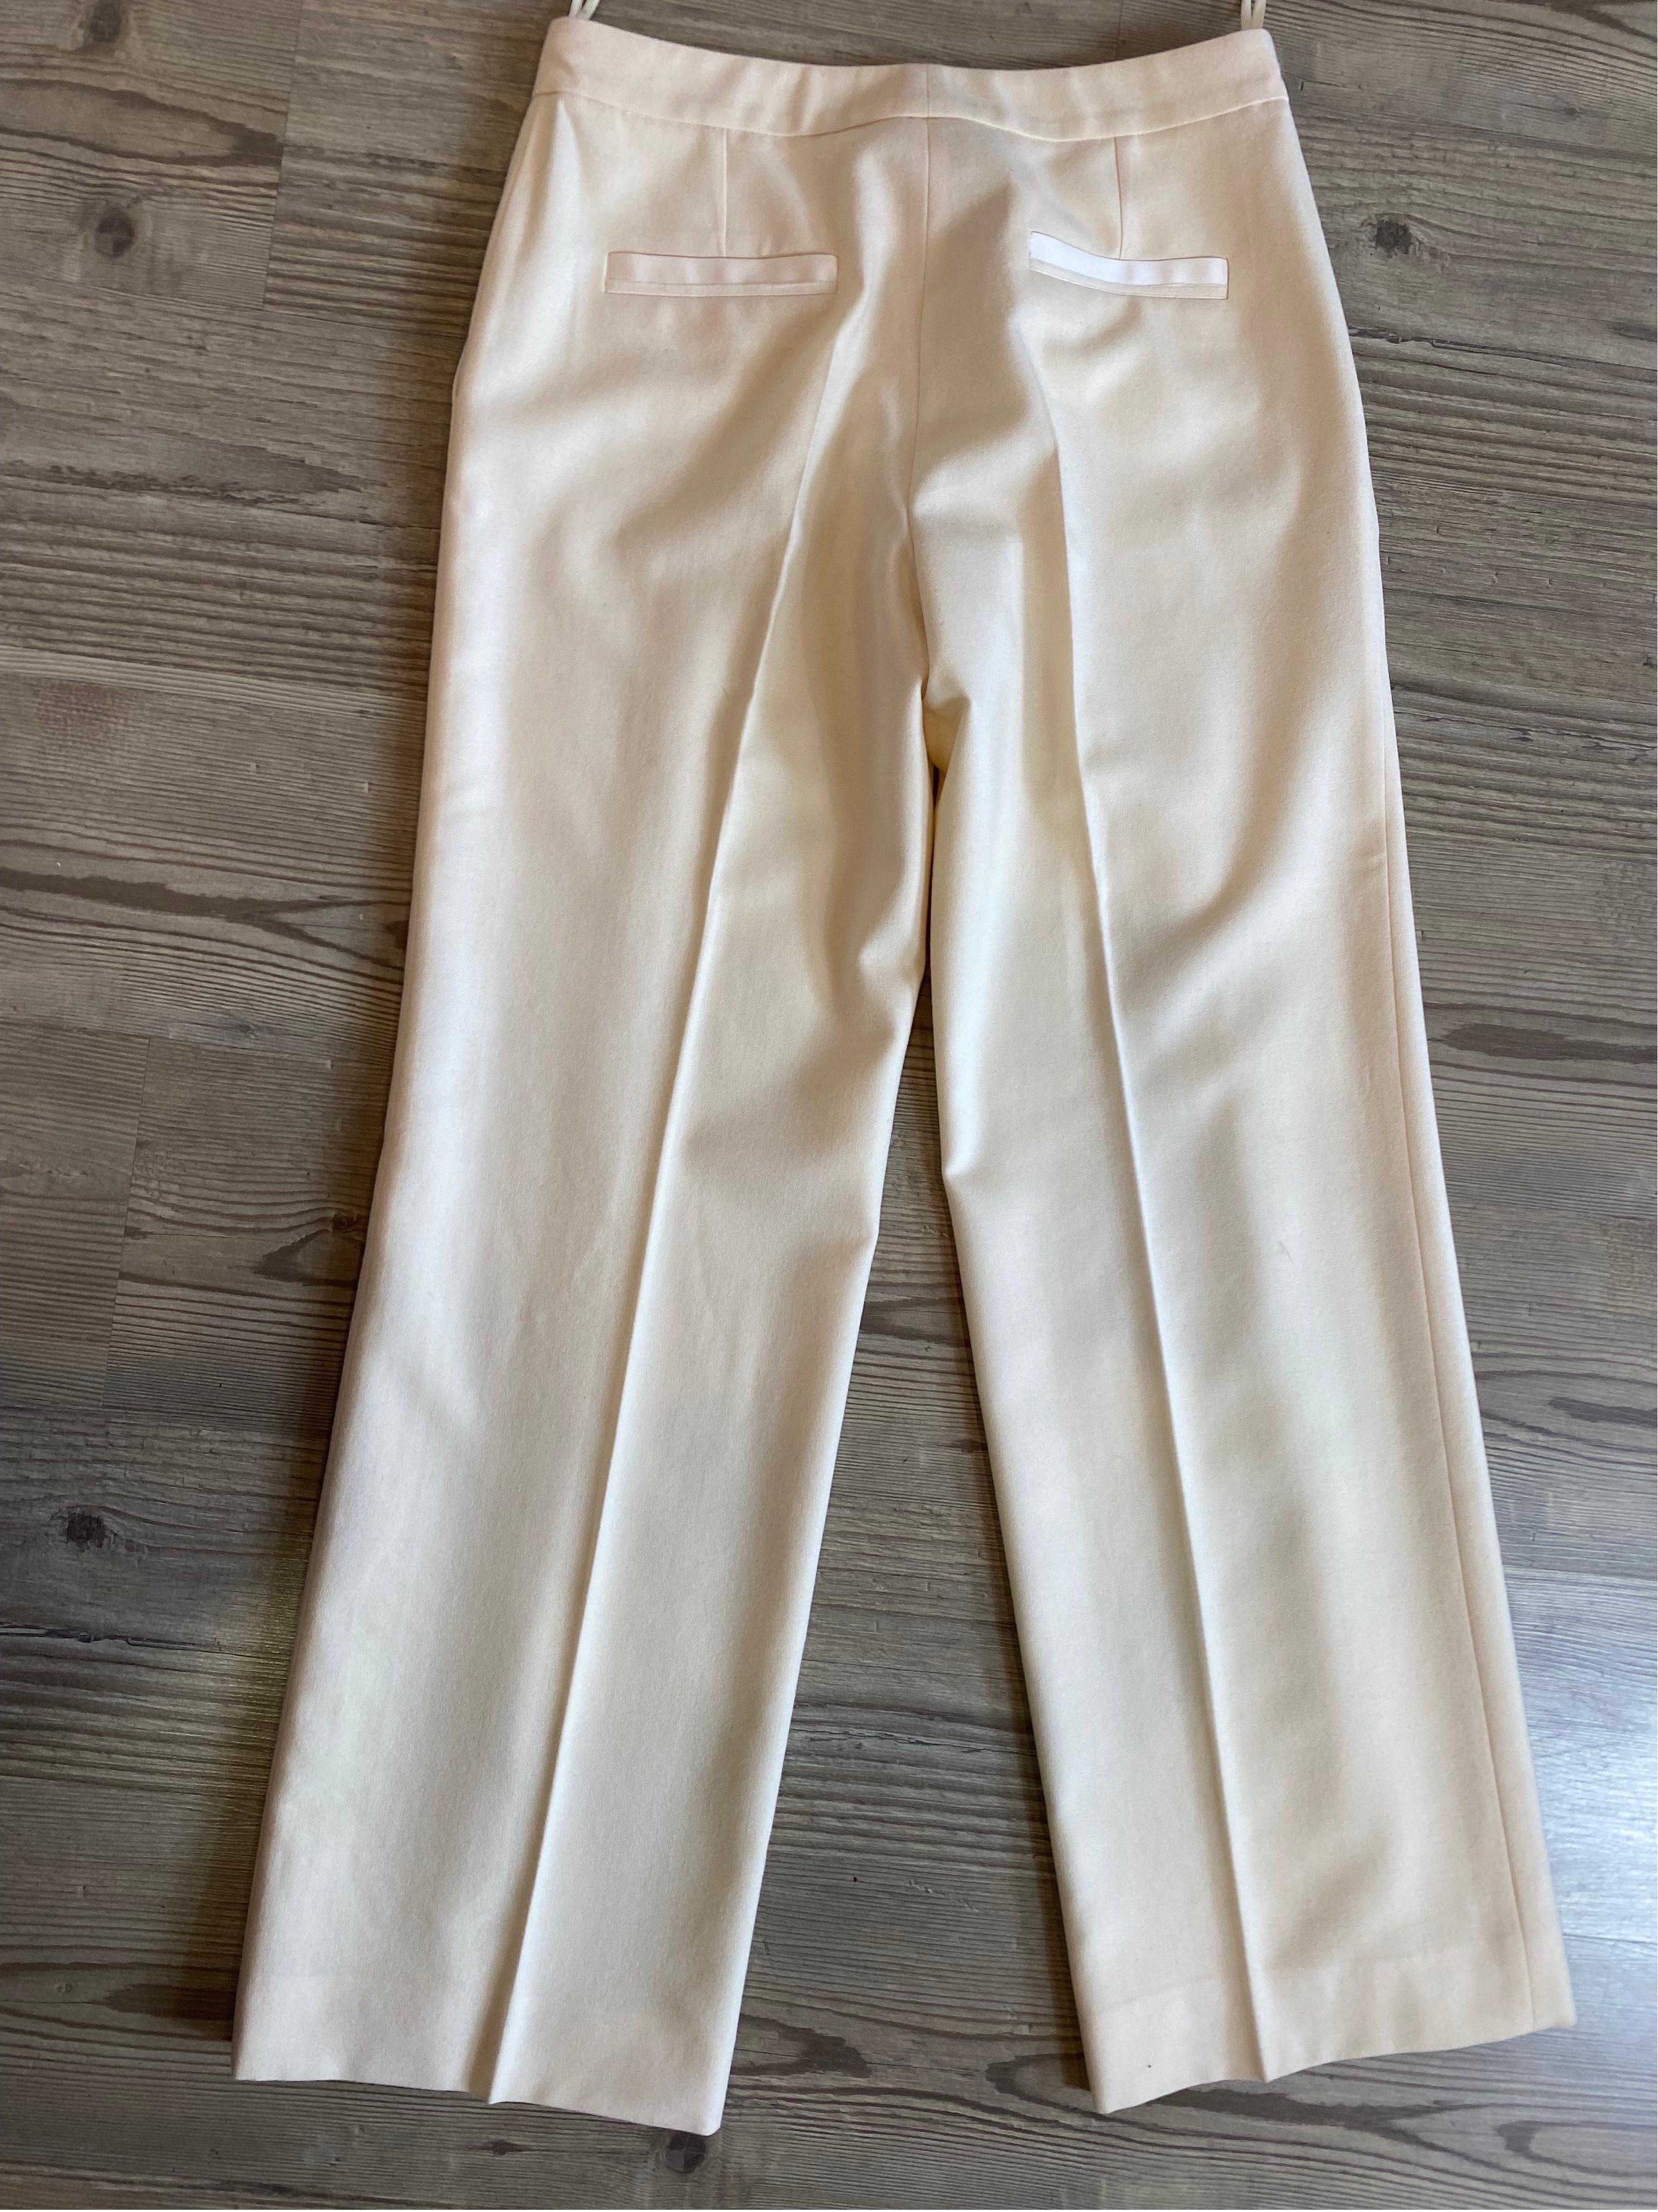 Chanel wool trousers
In wool with silk lining.
Painted metal logo.
Size 42.
Life 41
Flanders 51
Length 104
In excellent condition, shows signs of normal use.